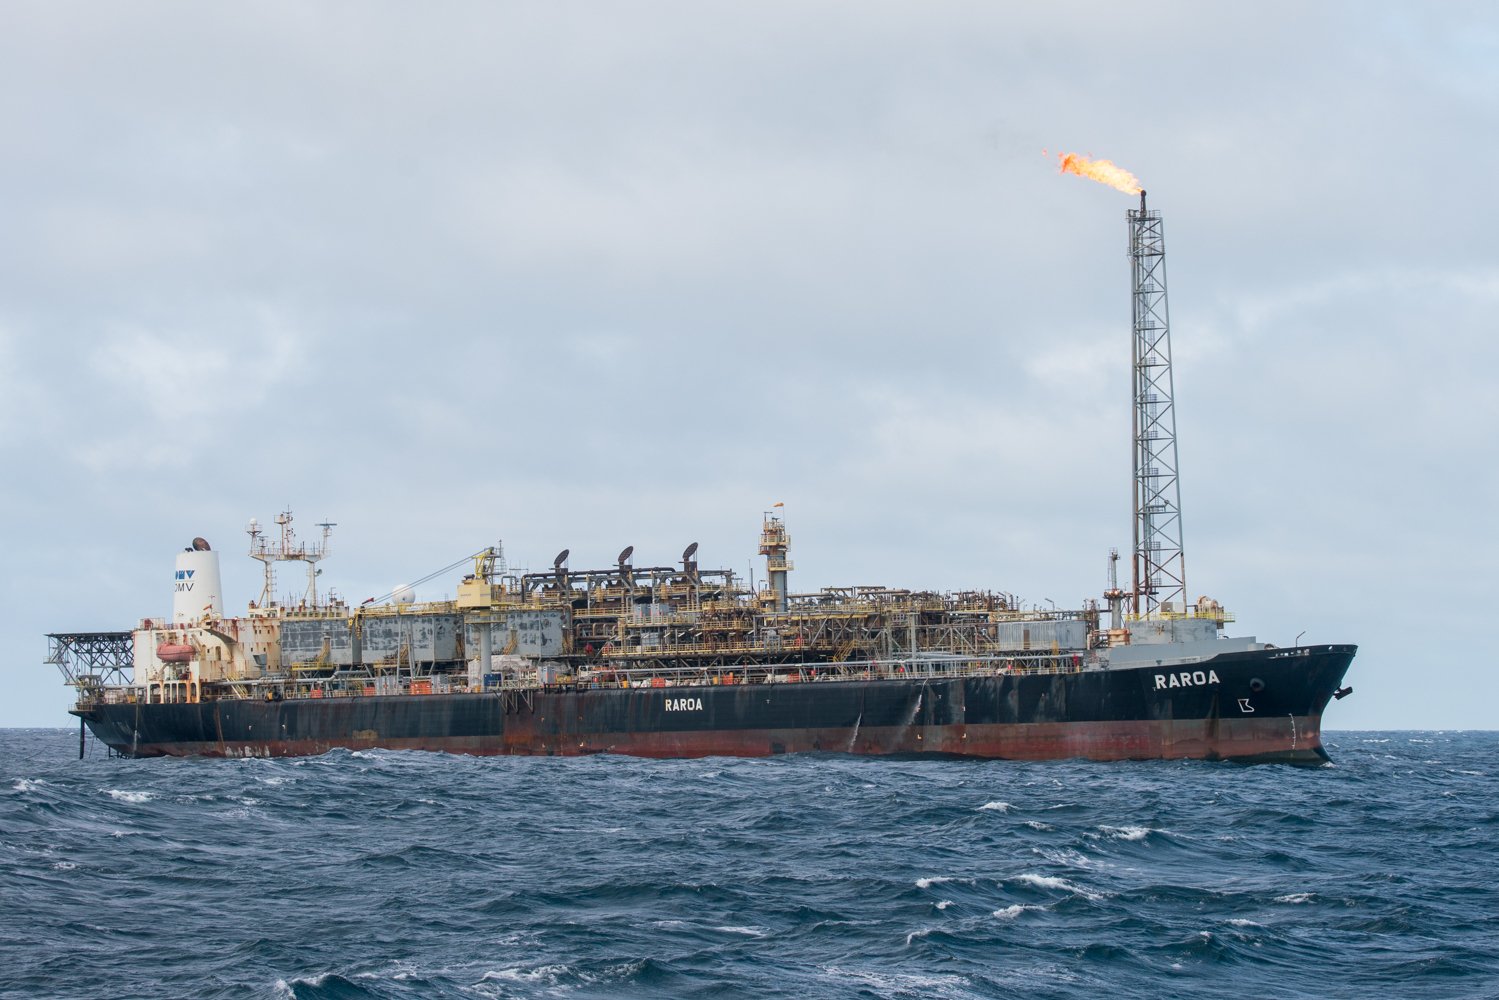 The Raroa, an OMV-owned oil storage and processing vessel. 